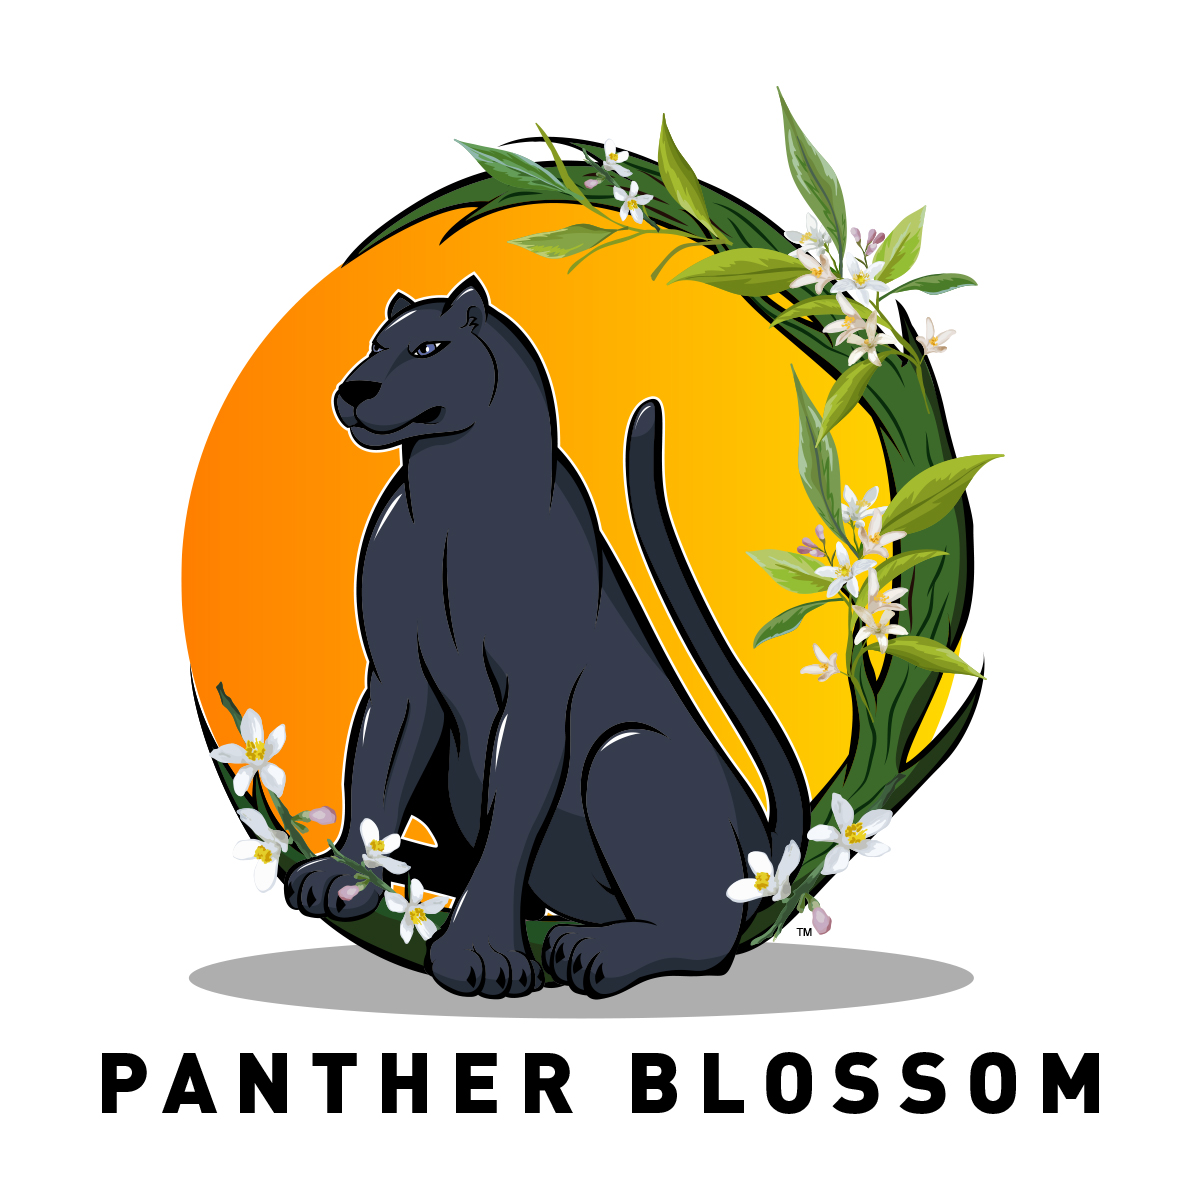 Panther Blossom